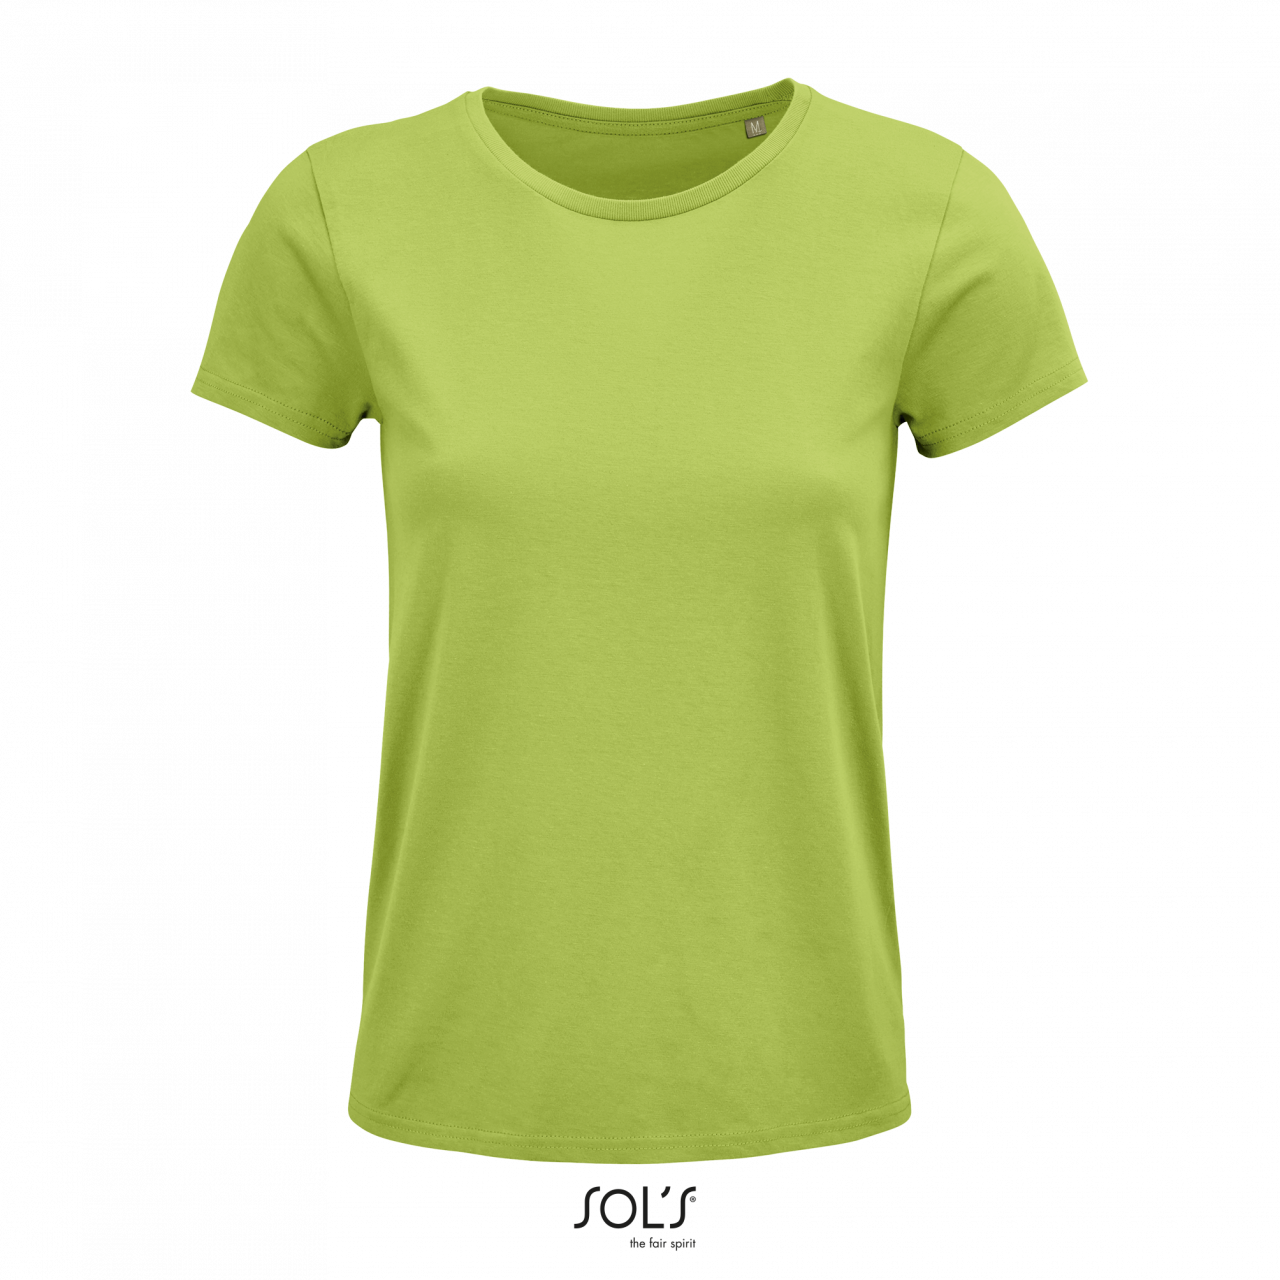 Sol's Crusader Women - Round-neck Fitted Jersey T-shirt - Sol's Crusader Women - Round-neck Fitted Jersey T-shirt - Kiwi